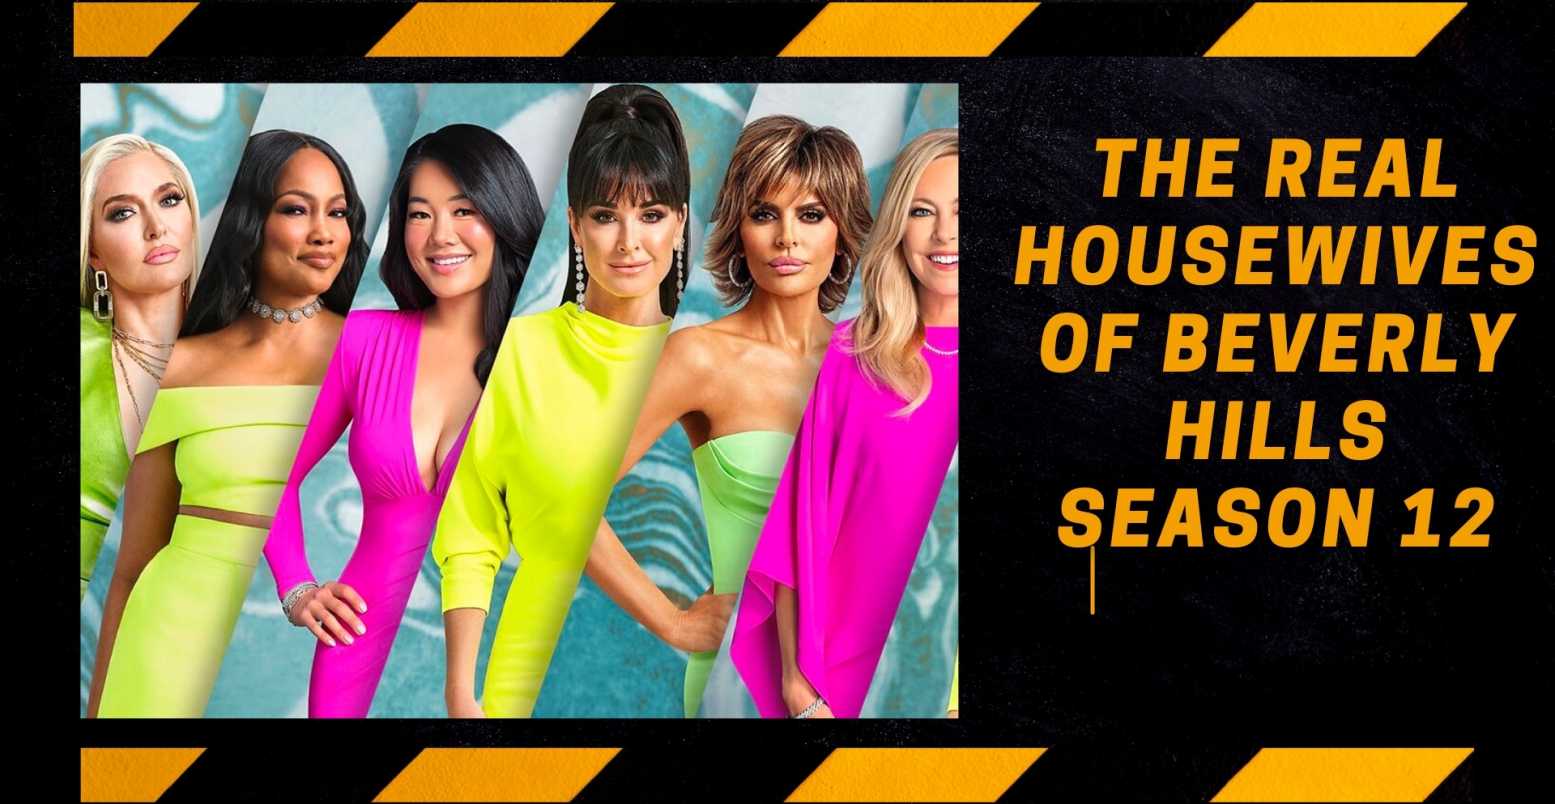 The Real Housewives of Beverly Hills Season 12: Release date